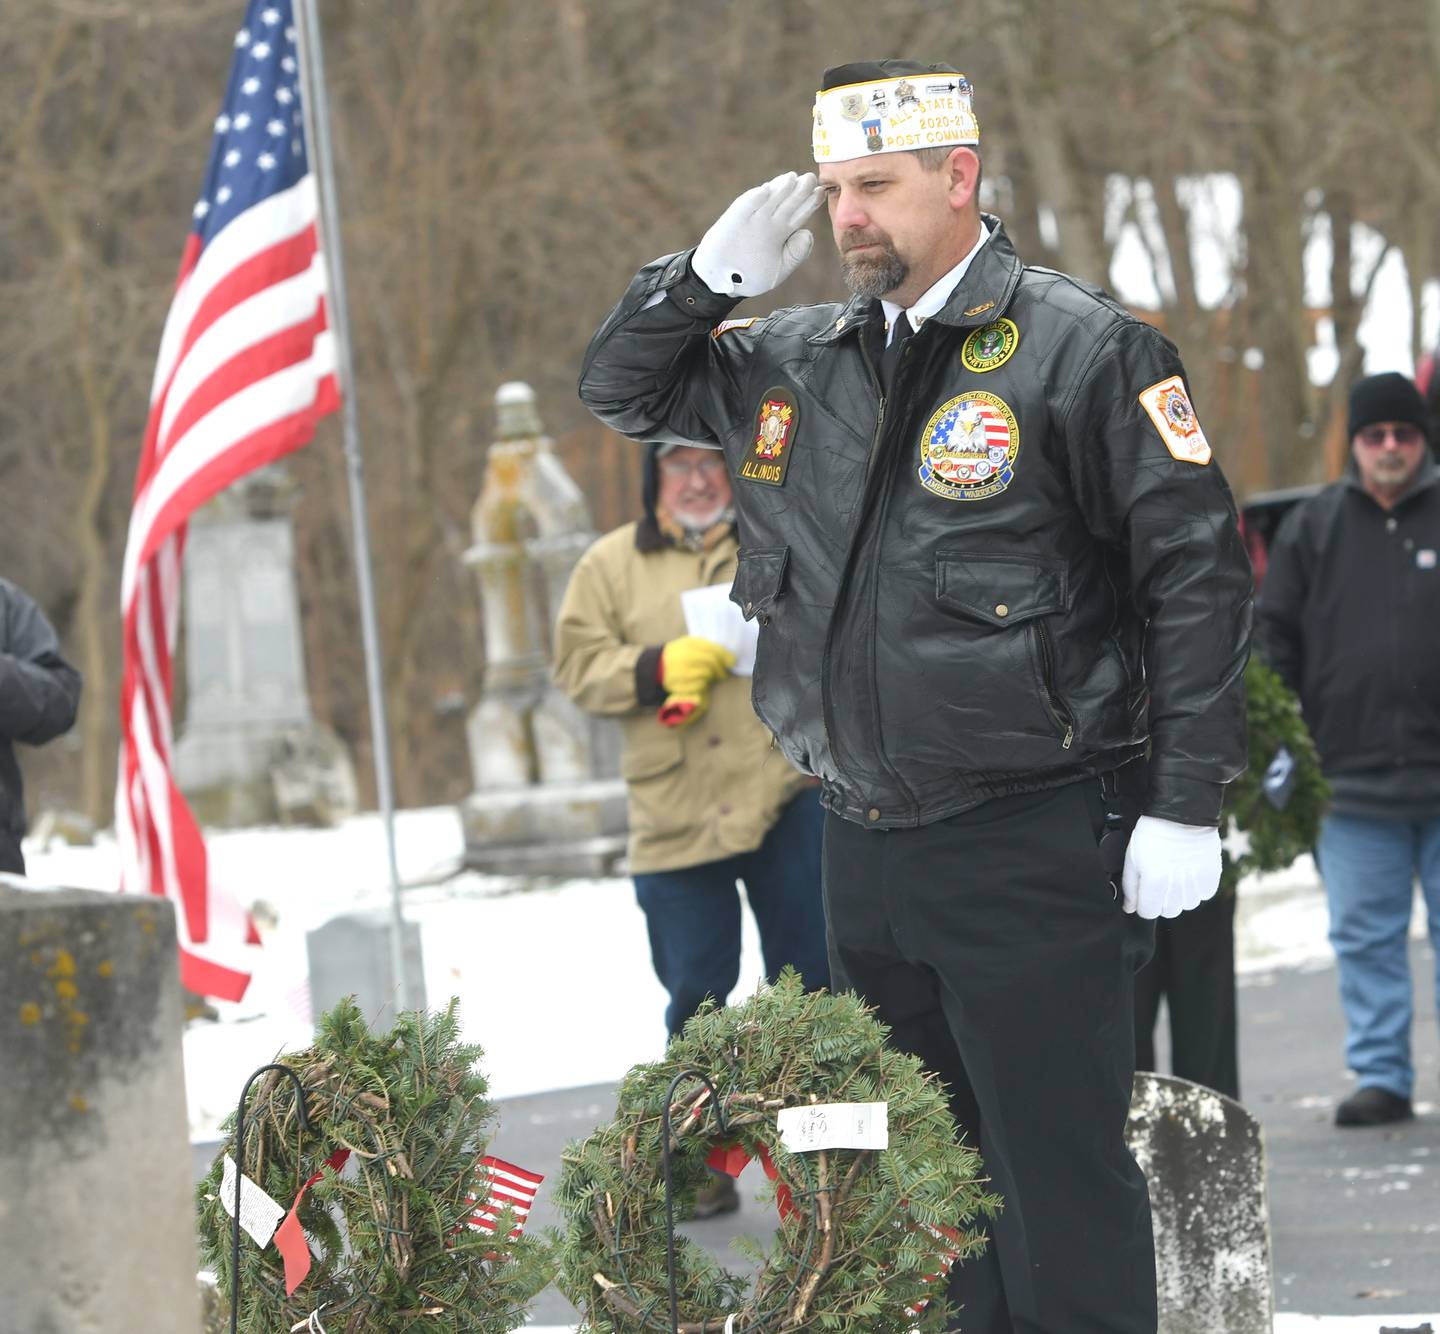 Jason Stoll of Oregon, an Army veteran, salutes after laying a wreath in honor of the Coast Guard, at Daysville Cemetery on Dec. 17 during the Wreaths Across America project. Wreaths were then placed on veterans' graves by other volunteers and veterans.